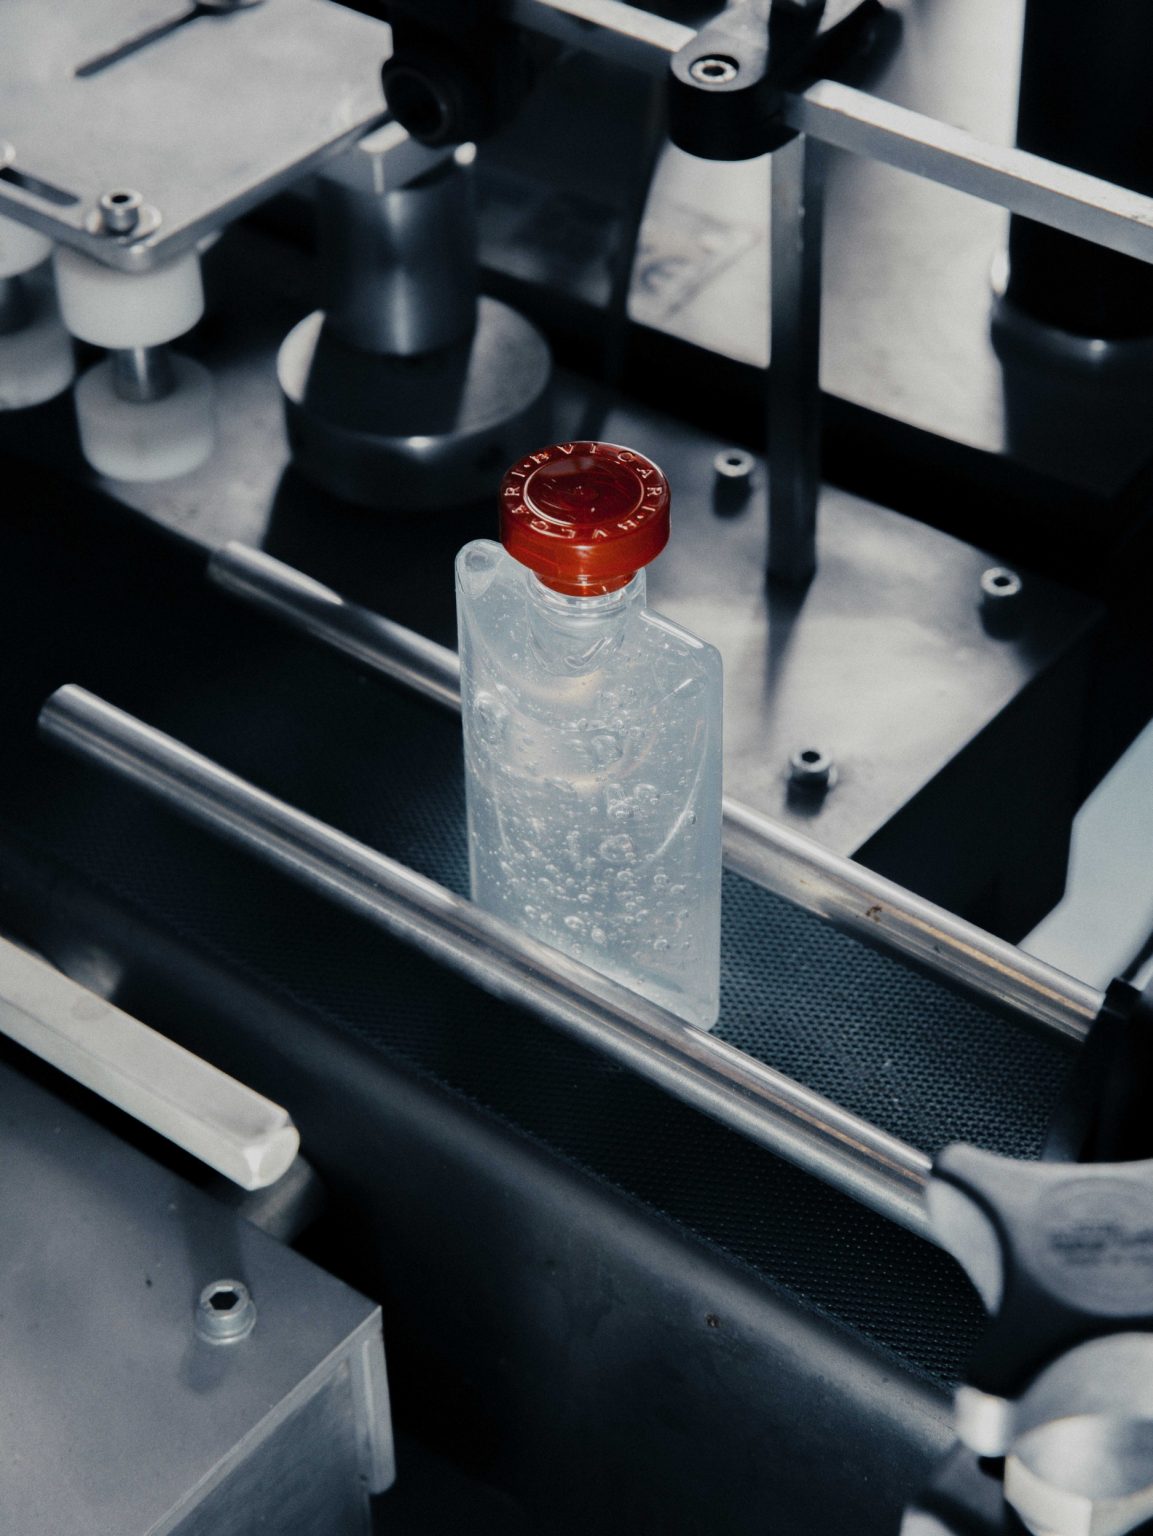 Inside ICS S.p.a. (Industrie Cosmetiche Riunite), in Lodi, Lombardy.  In this image: a bottle of Bulgari disinfectant liquid in the bottling line. Italy, April, 2020